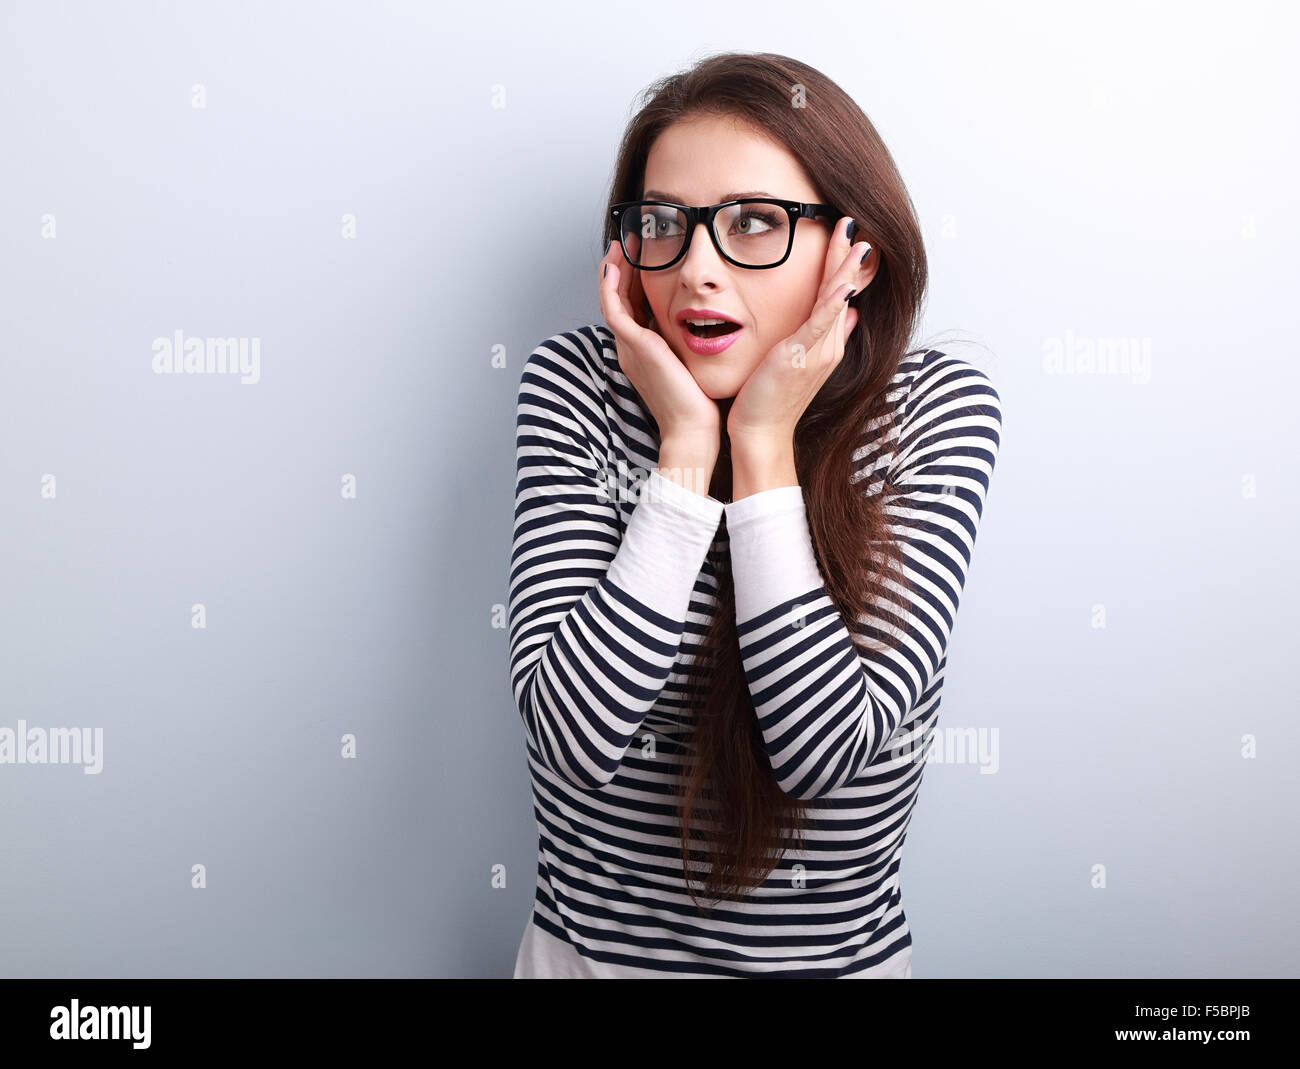 Fun surprising young woman in eyeglasses looking on empty copy space background Stock Photo